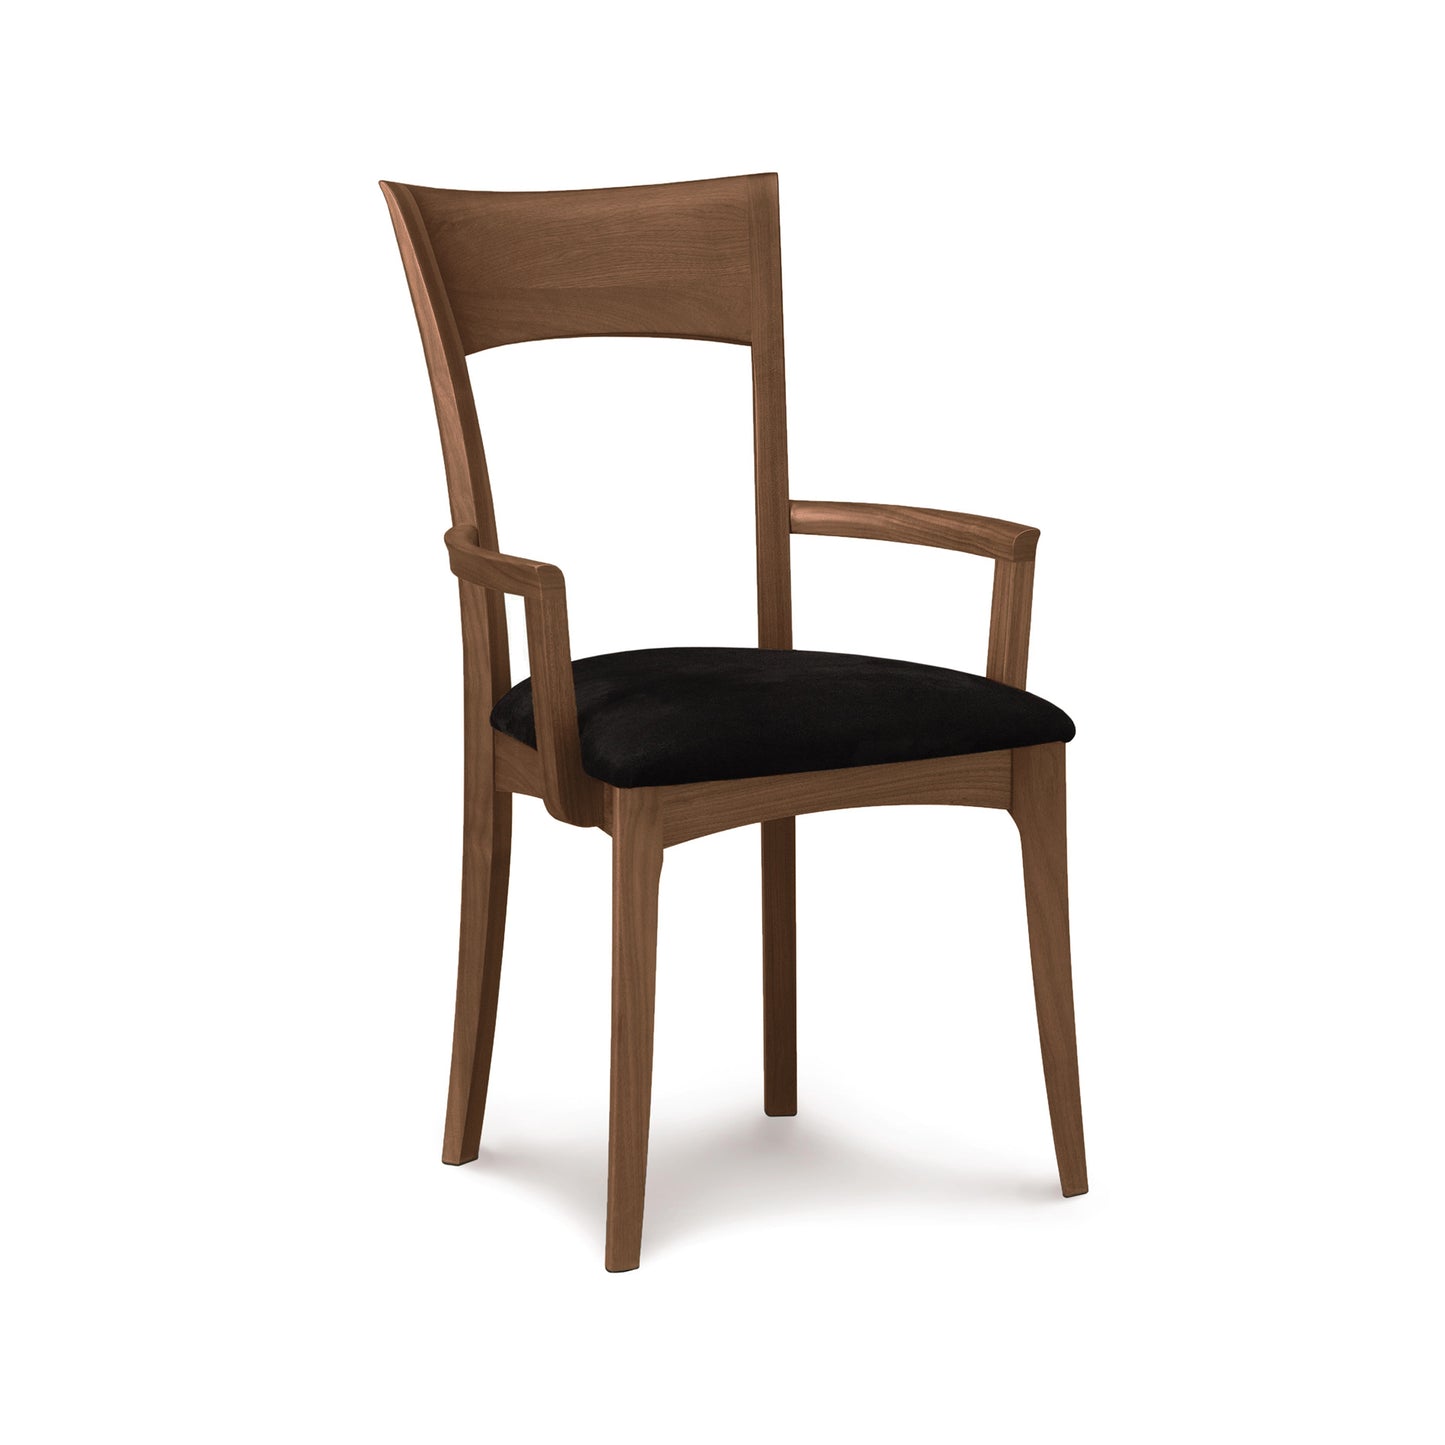 A solid Copeland Furniture Ingrid Chair armchair with a black cushion on a white background.